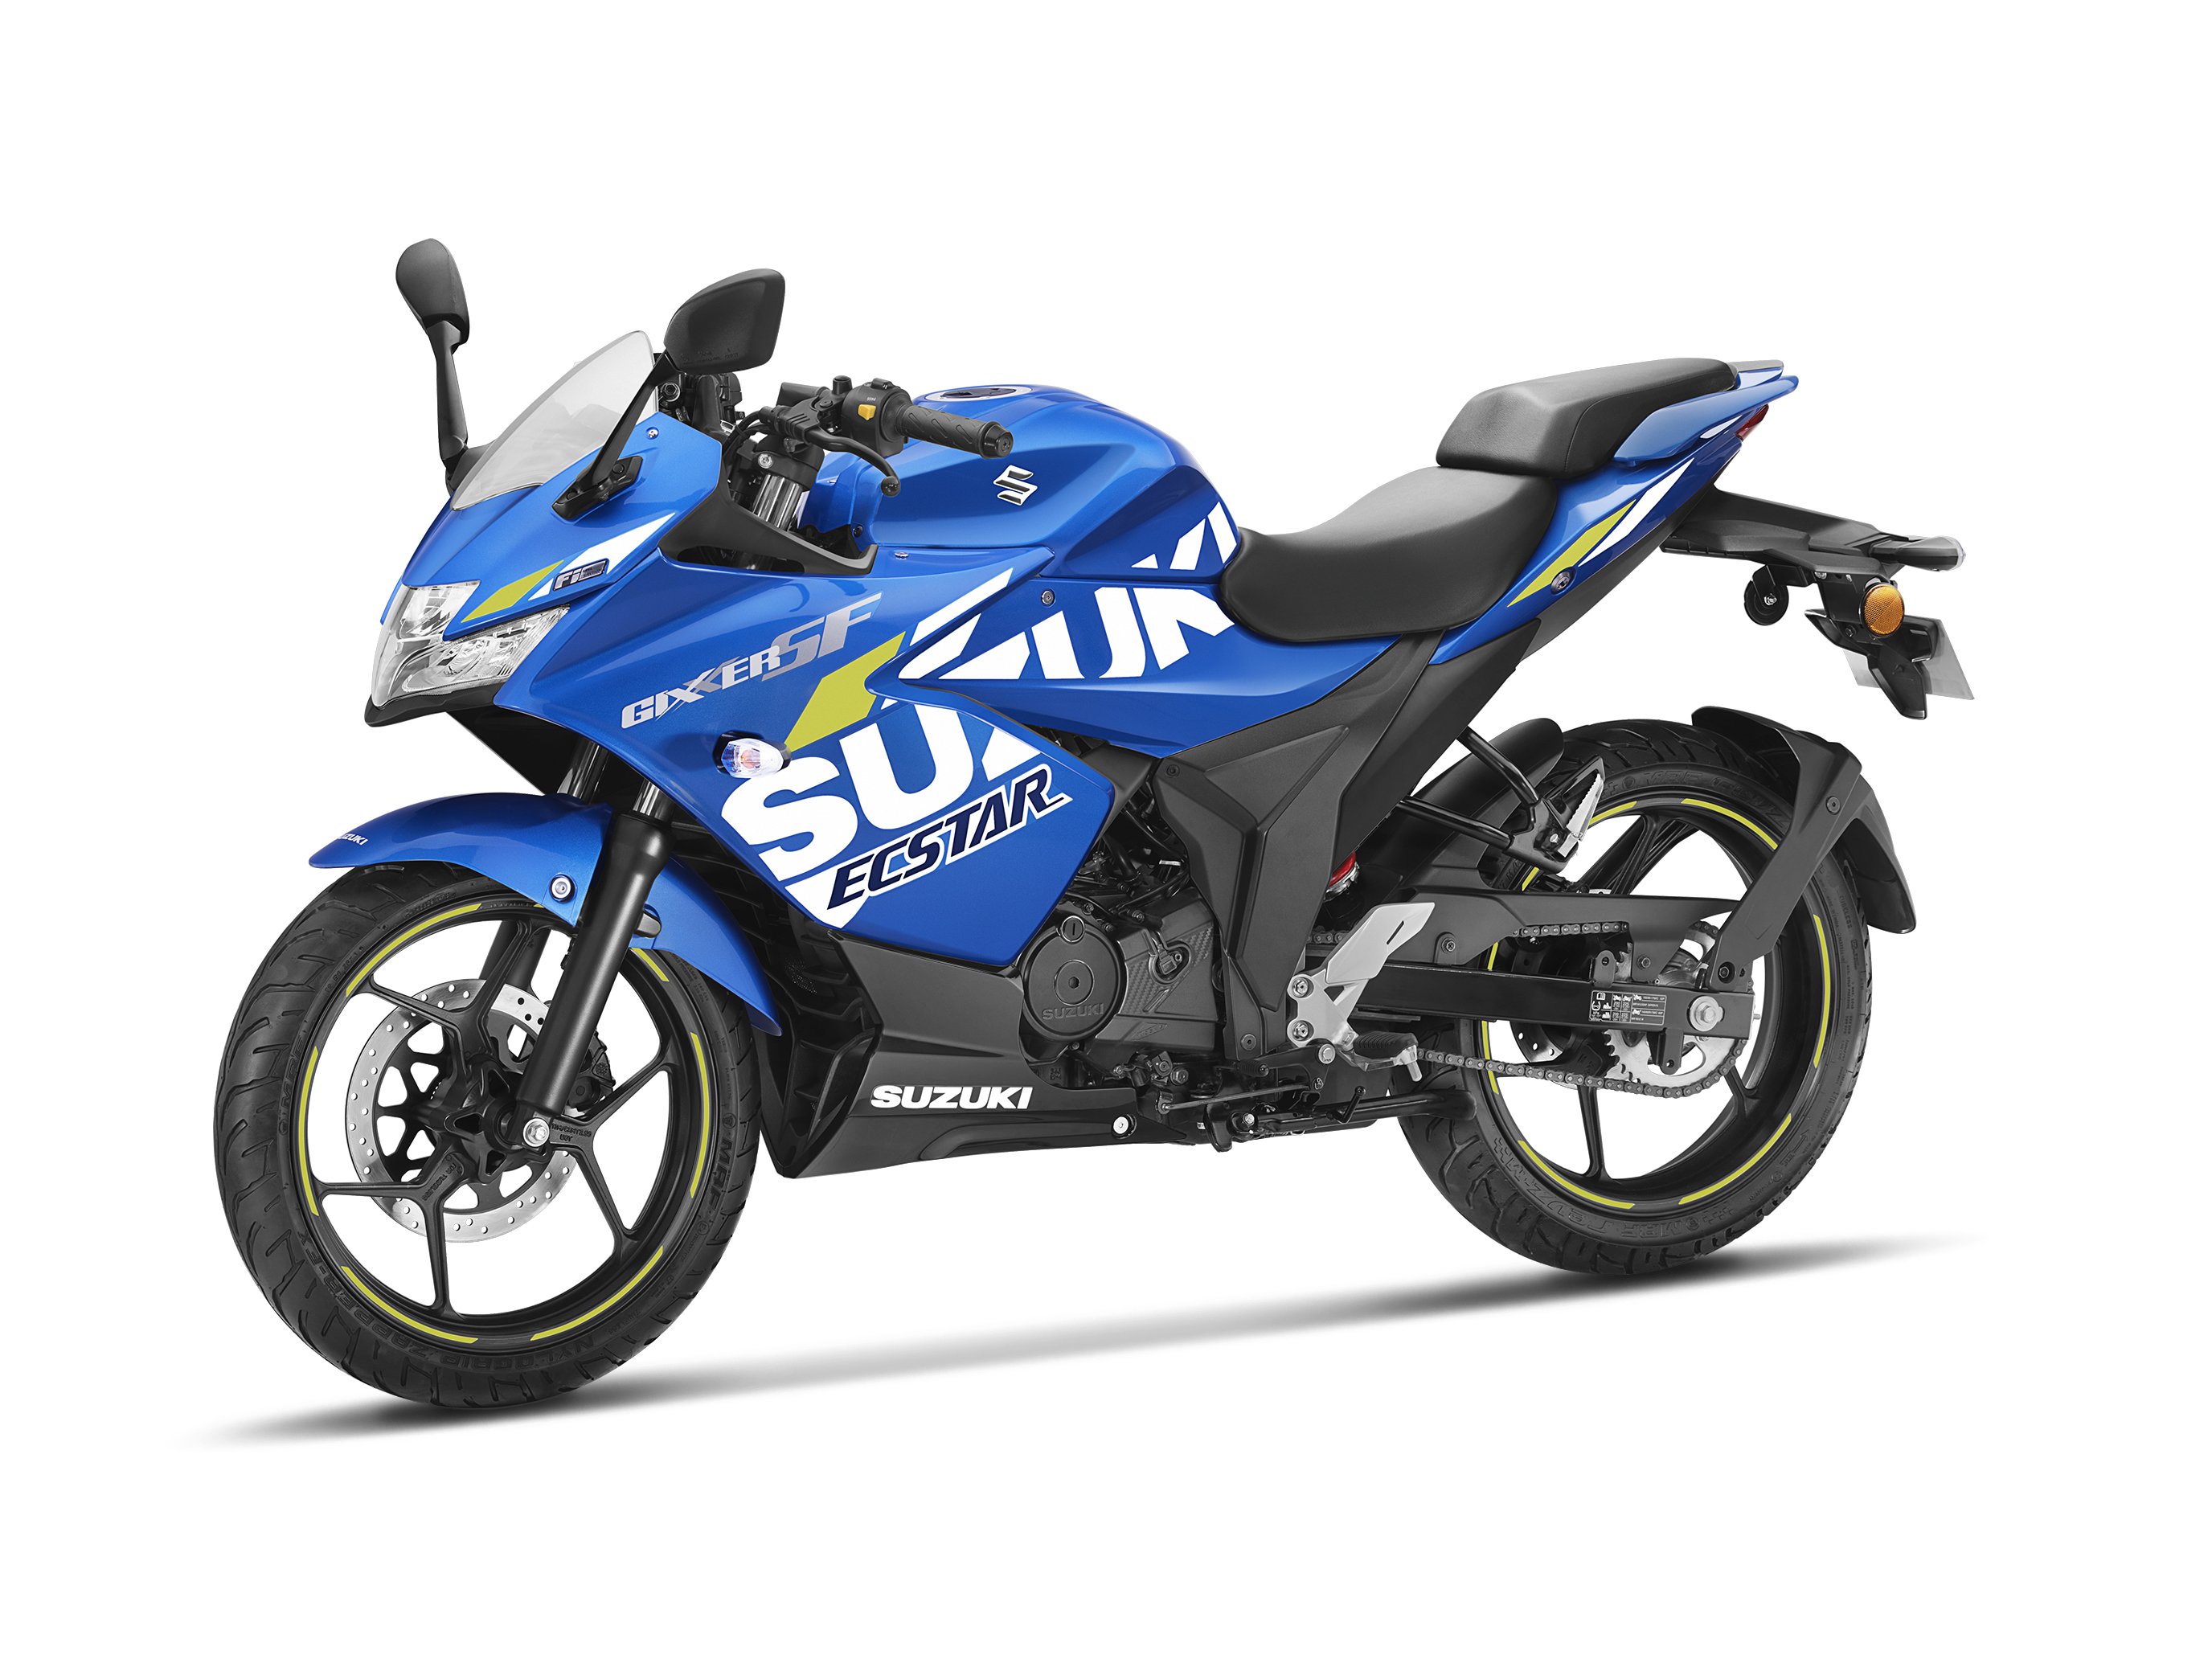  Suzuki Gixxer  SF Moto GP Edition Launched Priced At Rs 1 